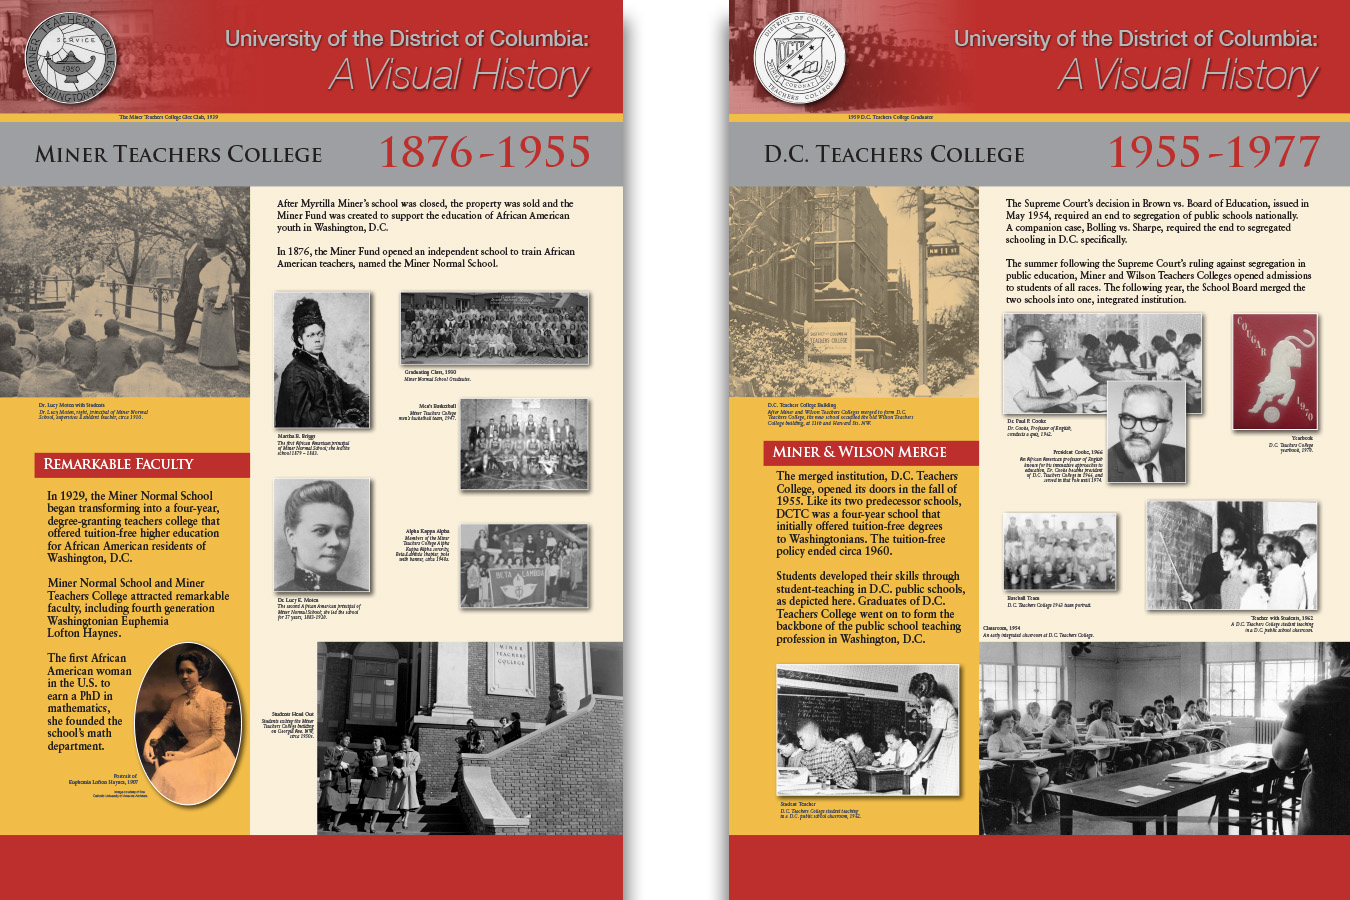 UDC pg2 : Miner's and Wilson merged to become DC's Teacher's College in 1955